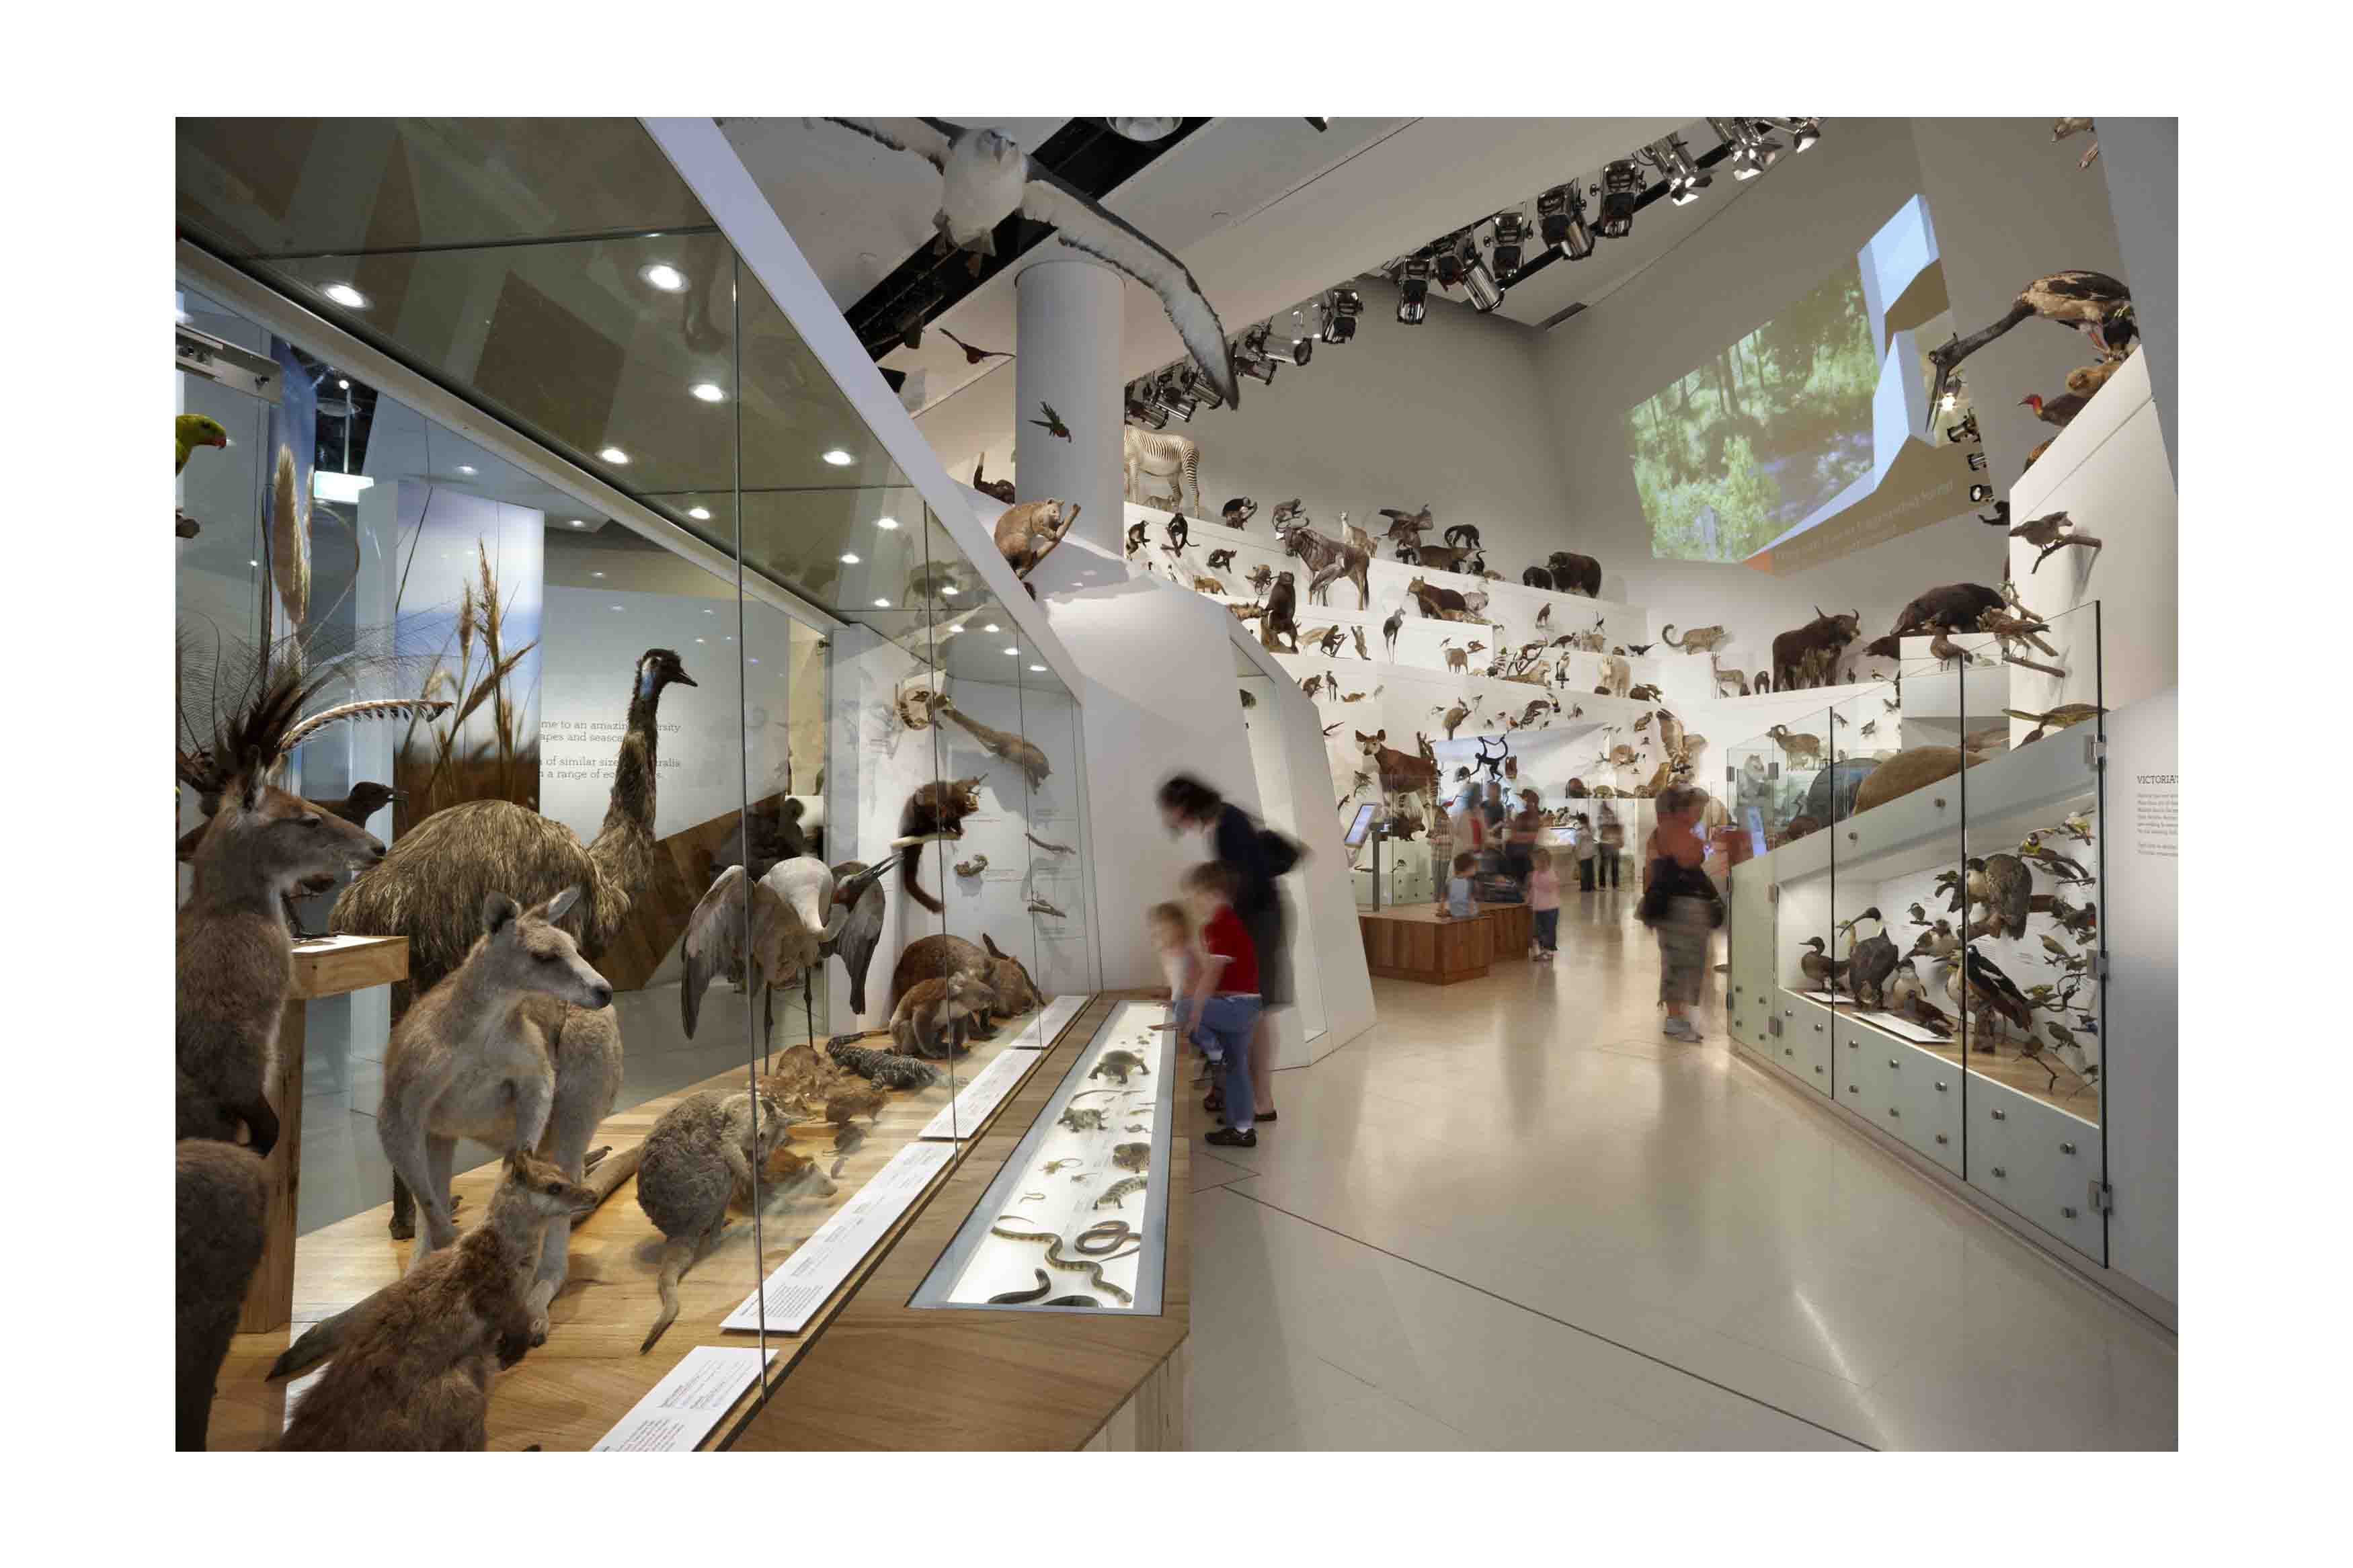 Melbourne Museum: A World of Museum Experiences at Home